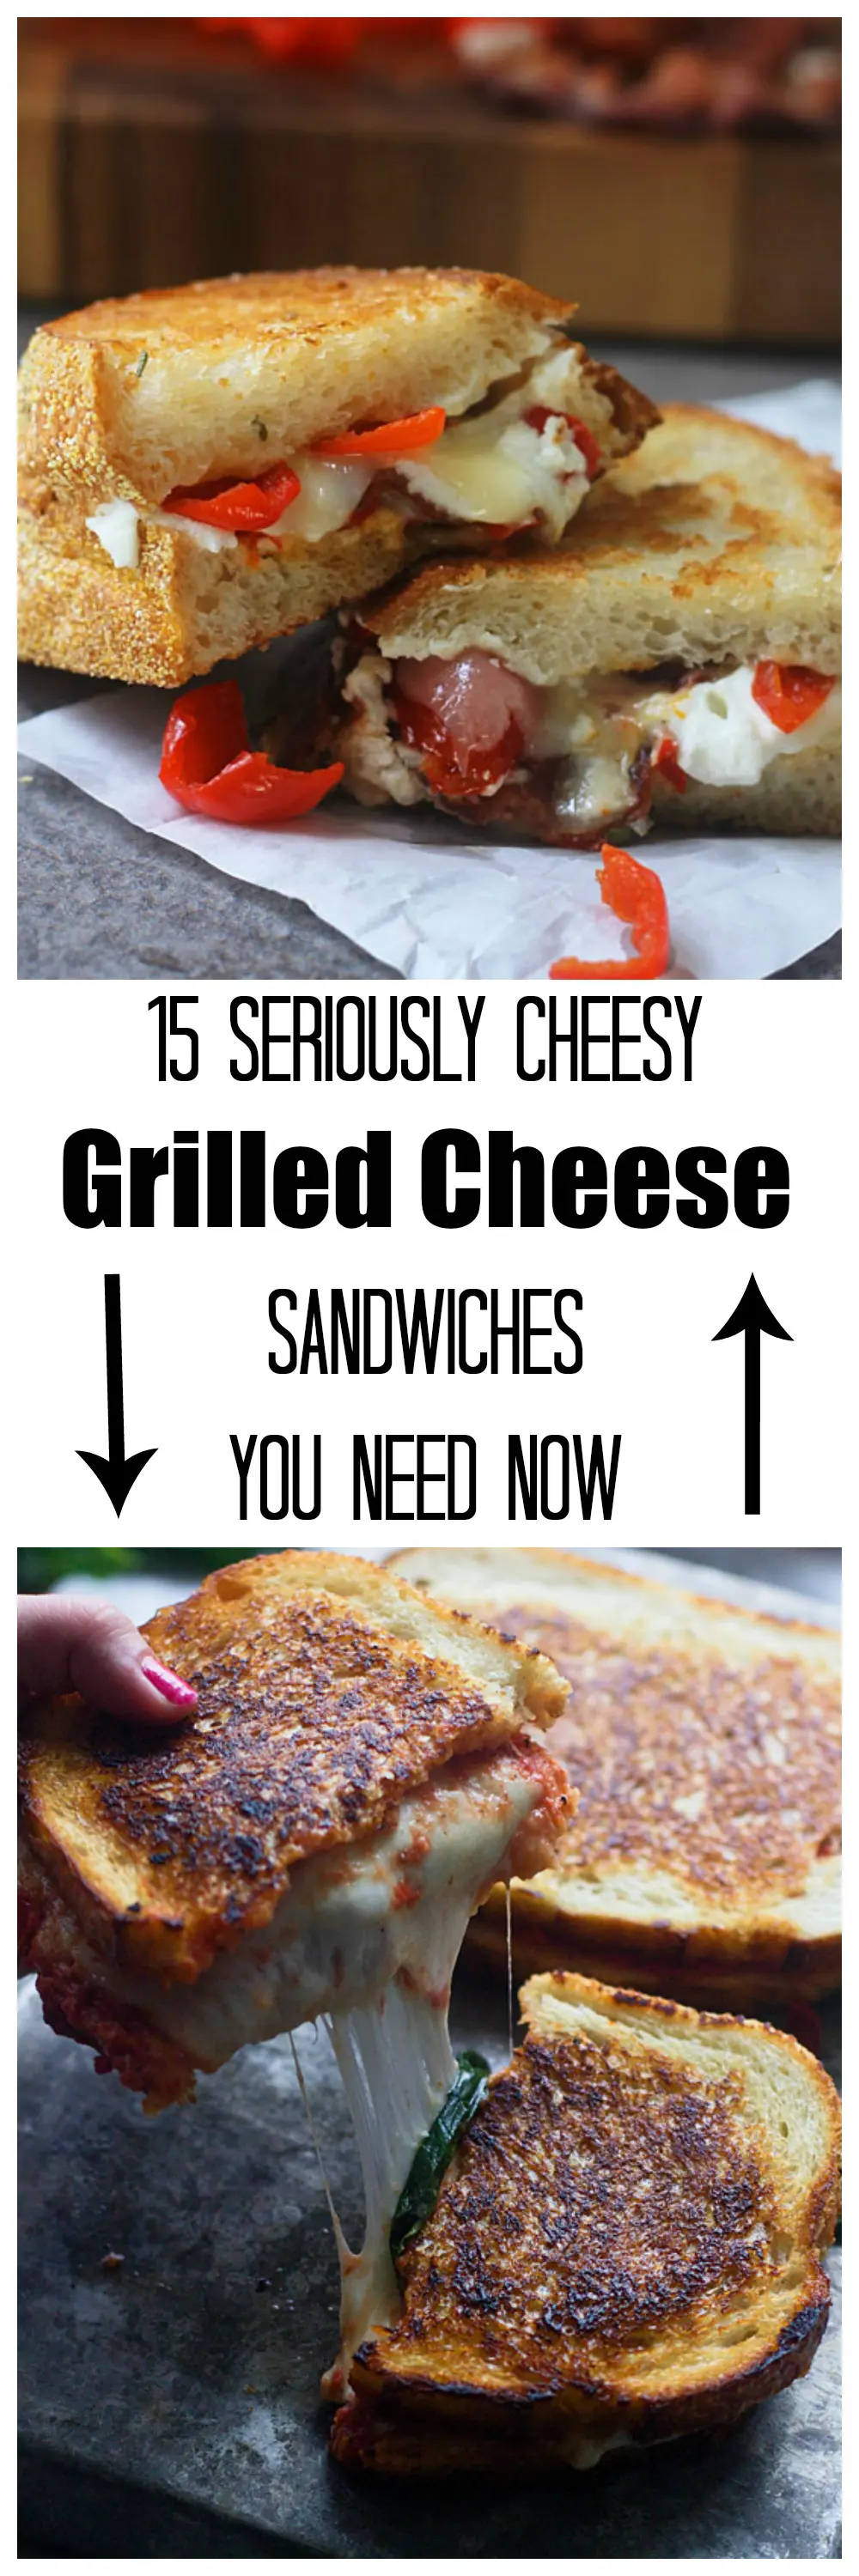 15 Seriously Cheesy Grilled Cheese Sandwiches You Need Now